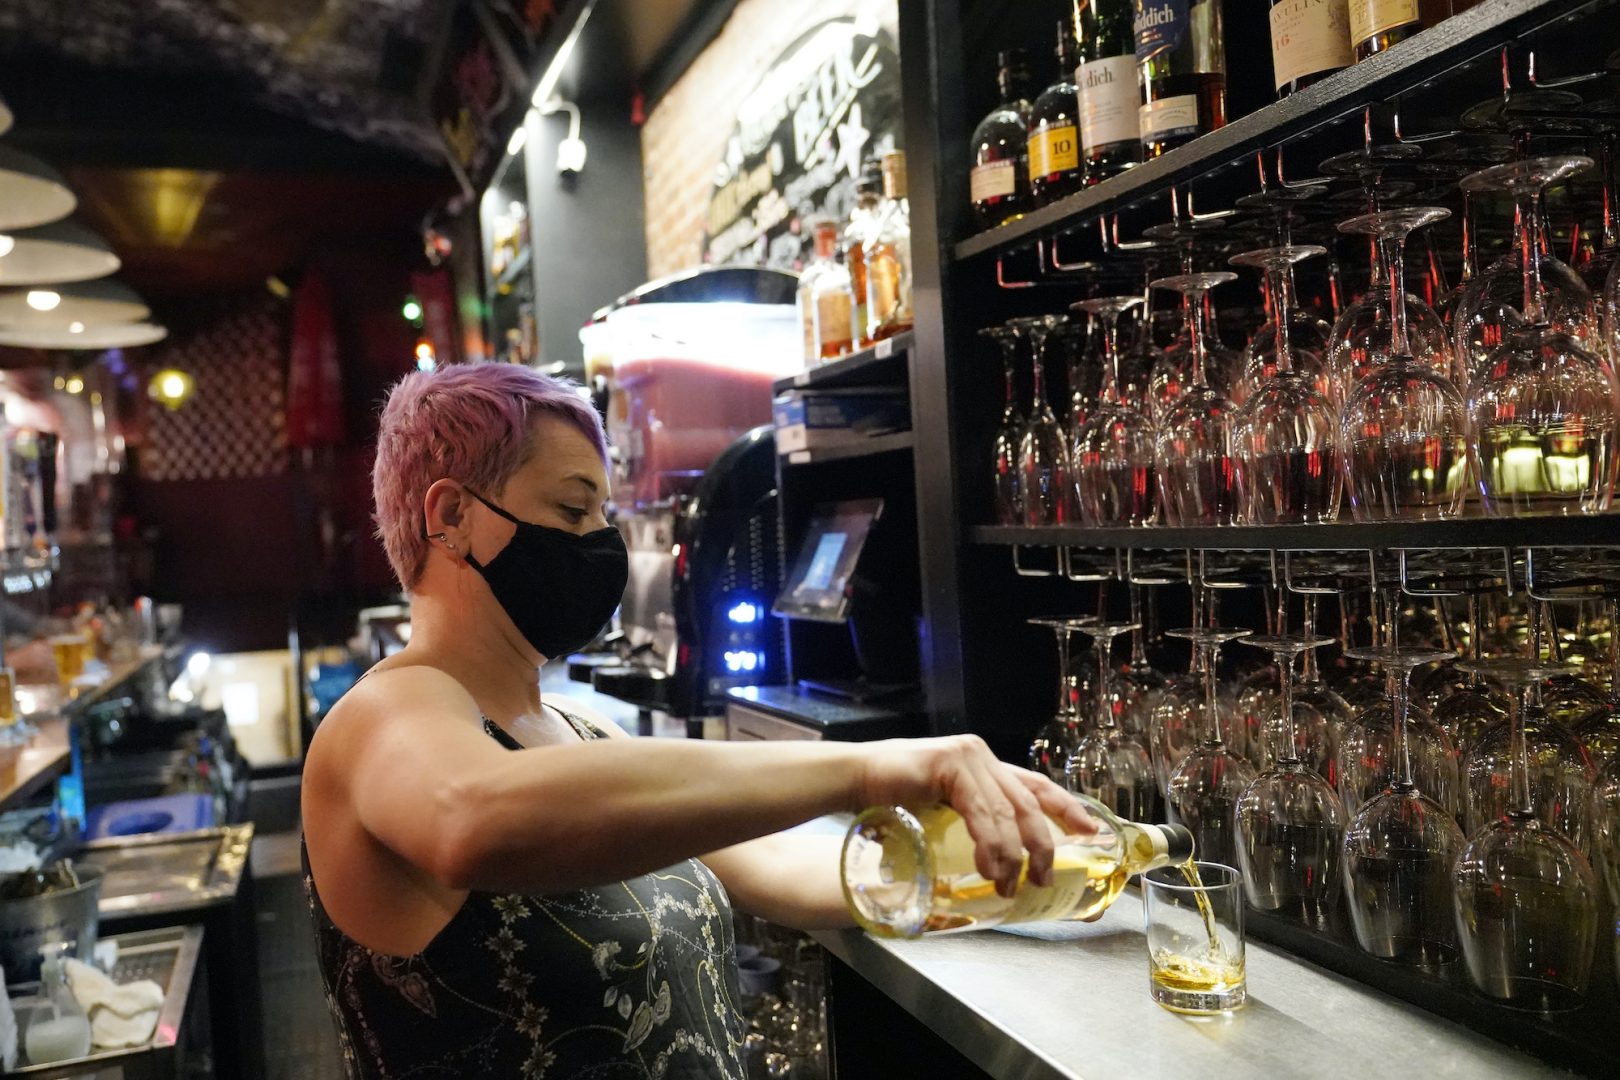 Erin Bellard pours a drink for a customer at her bar on Manhattan's Upper West Side, Monday, May 17, 2021, in New York.